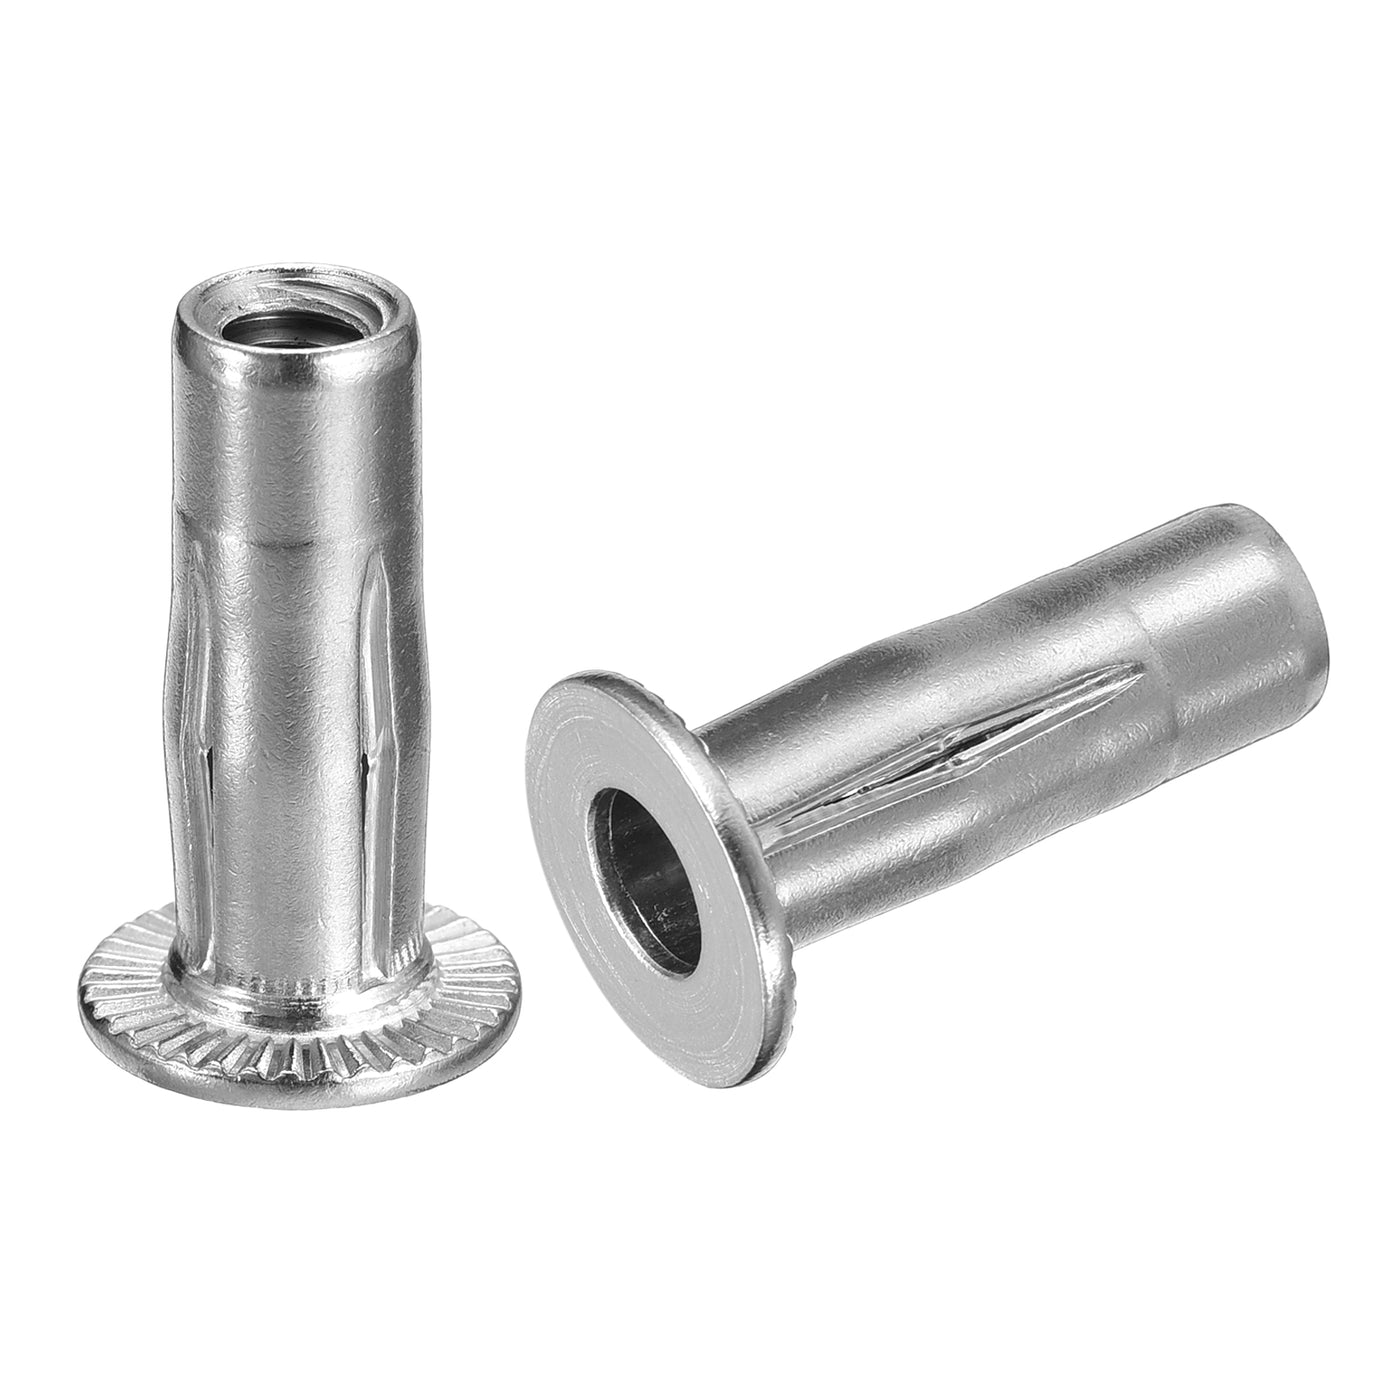 uxcell Uxcell Multi-Grip Rivet Nuts Pre-Bulbed Shank Flat Head Threaded Insert Nut 304 Stainless Steel Plus Nuts